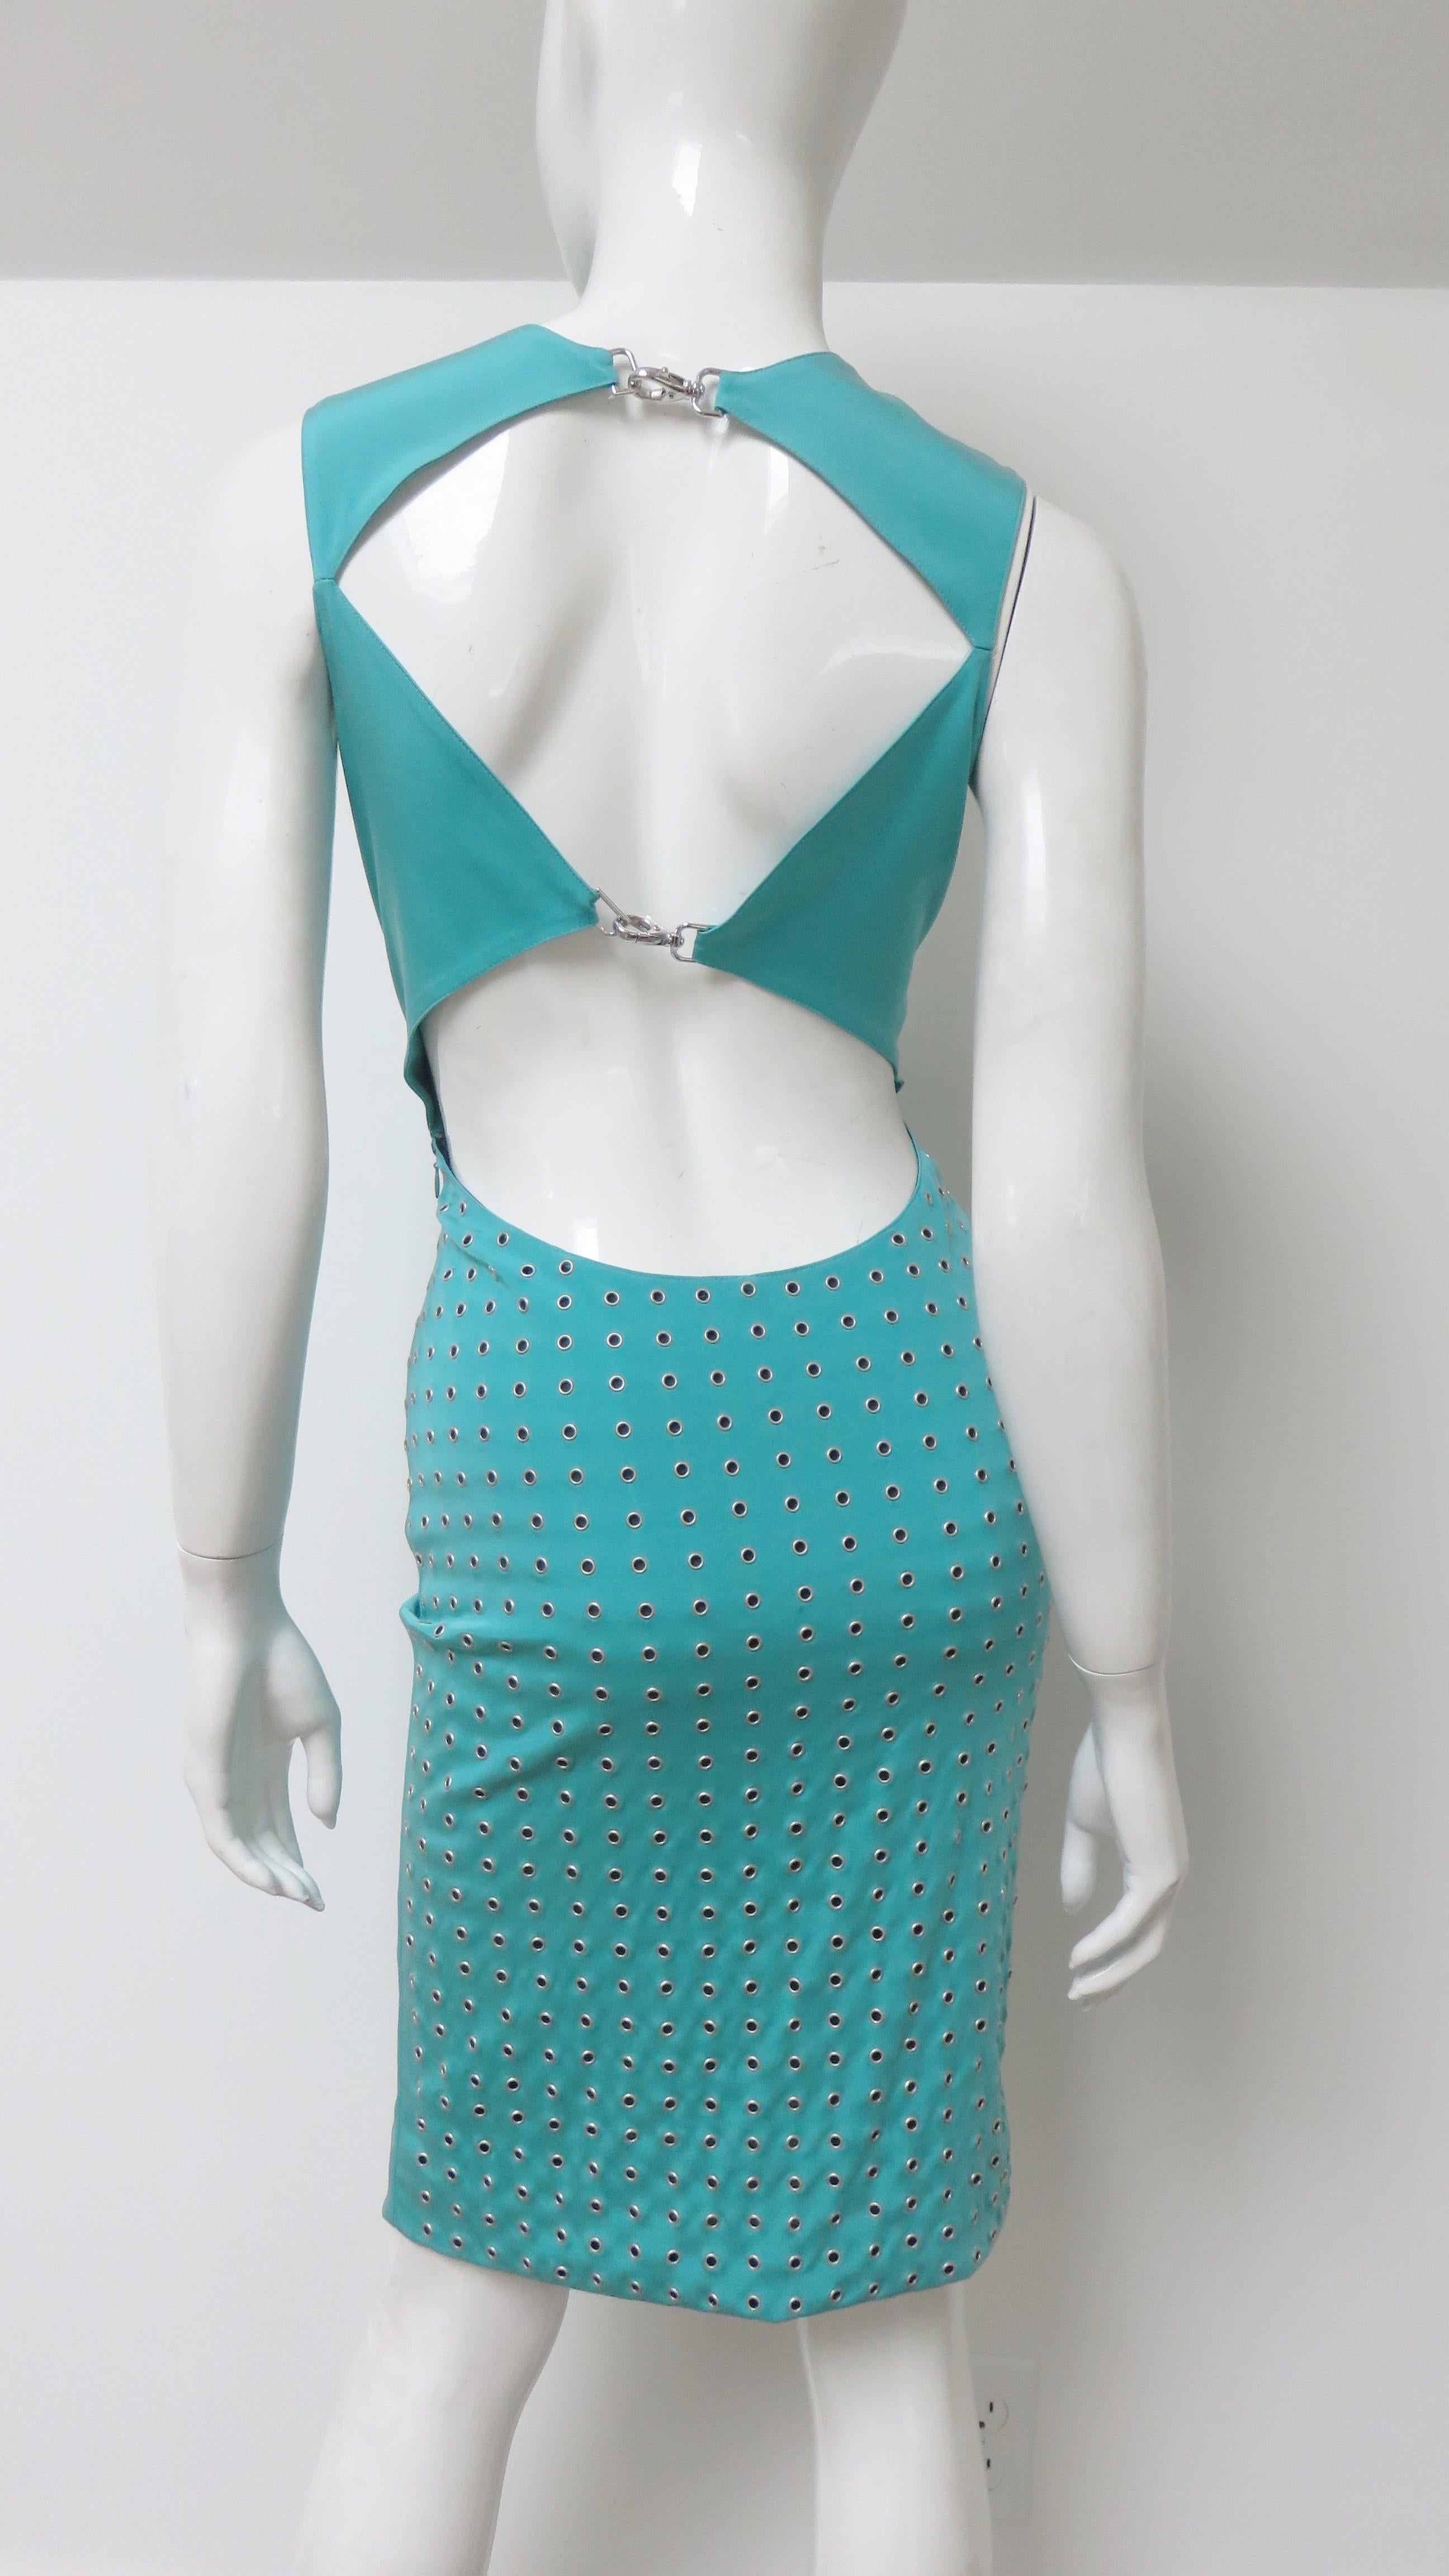 Gianni Versace Cut out Back Silk Dress with Grommets S/S 2003 For Sale 8